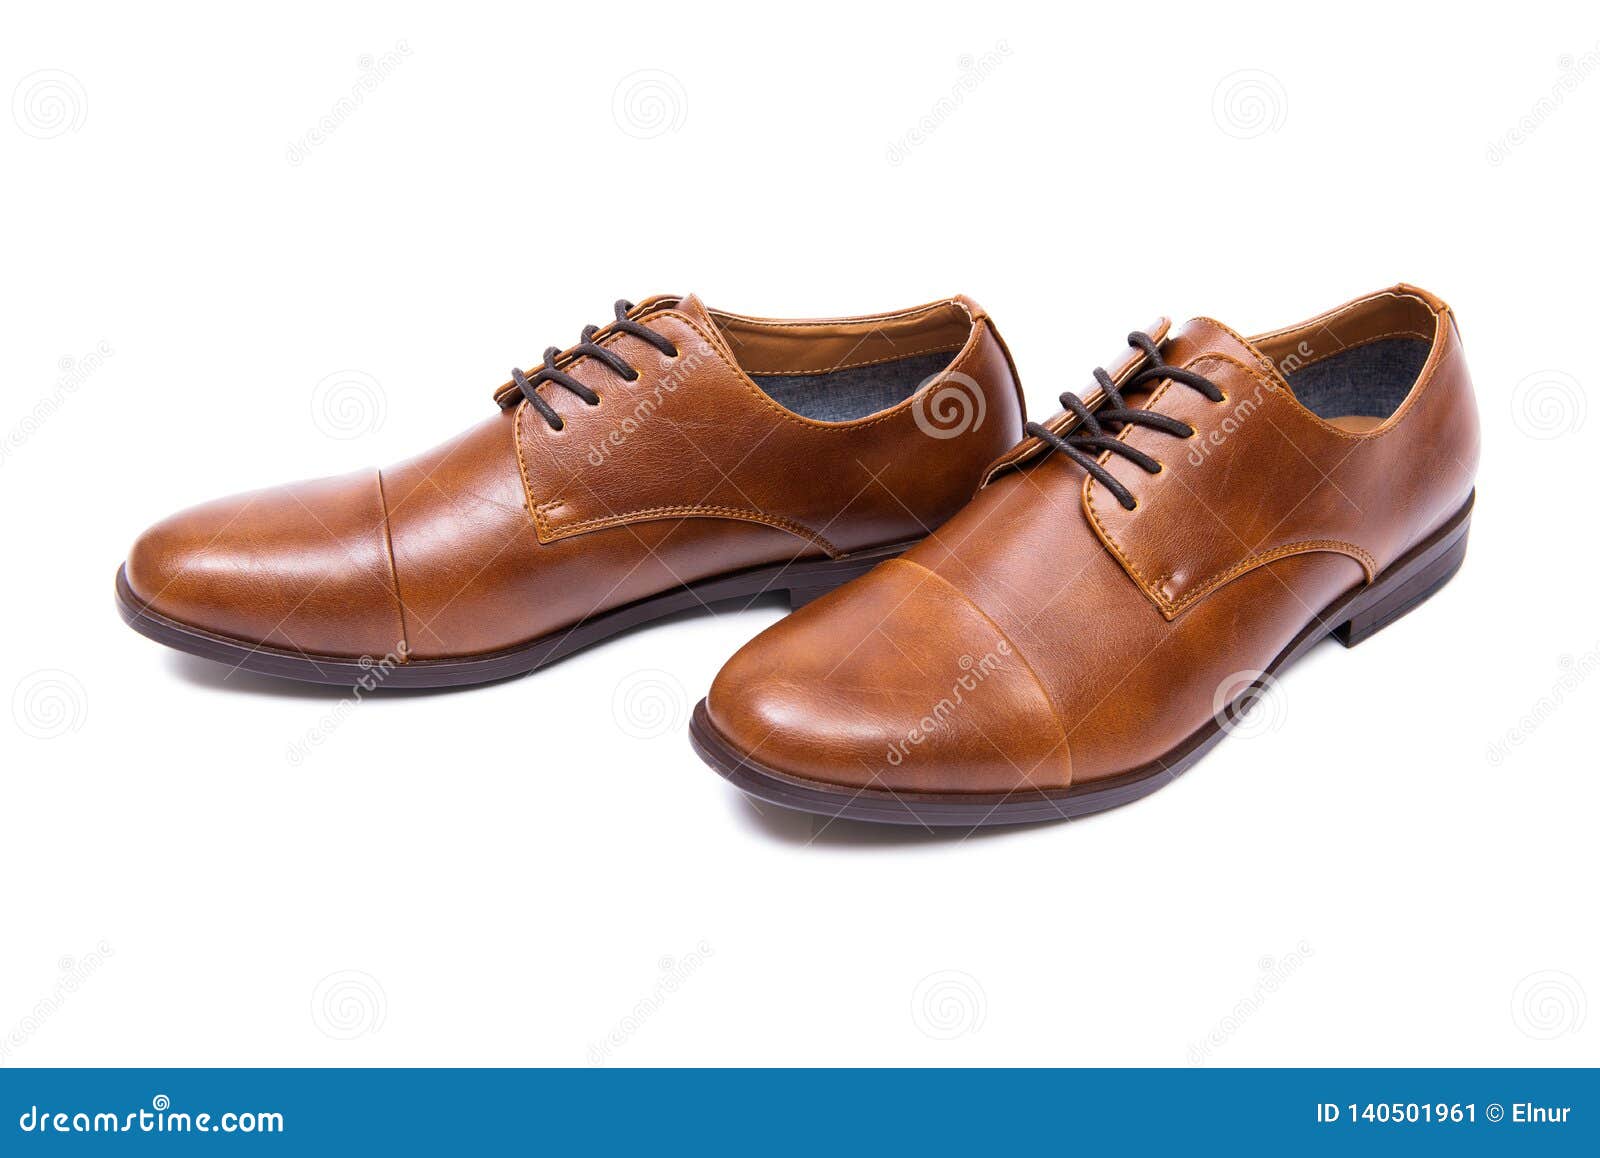 The Brown Shoes Isolated on White Background Stock Image - Image of ...